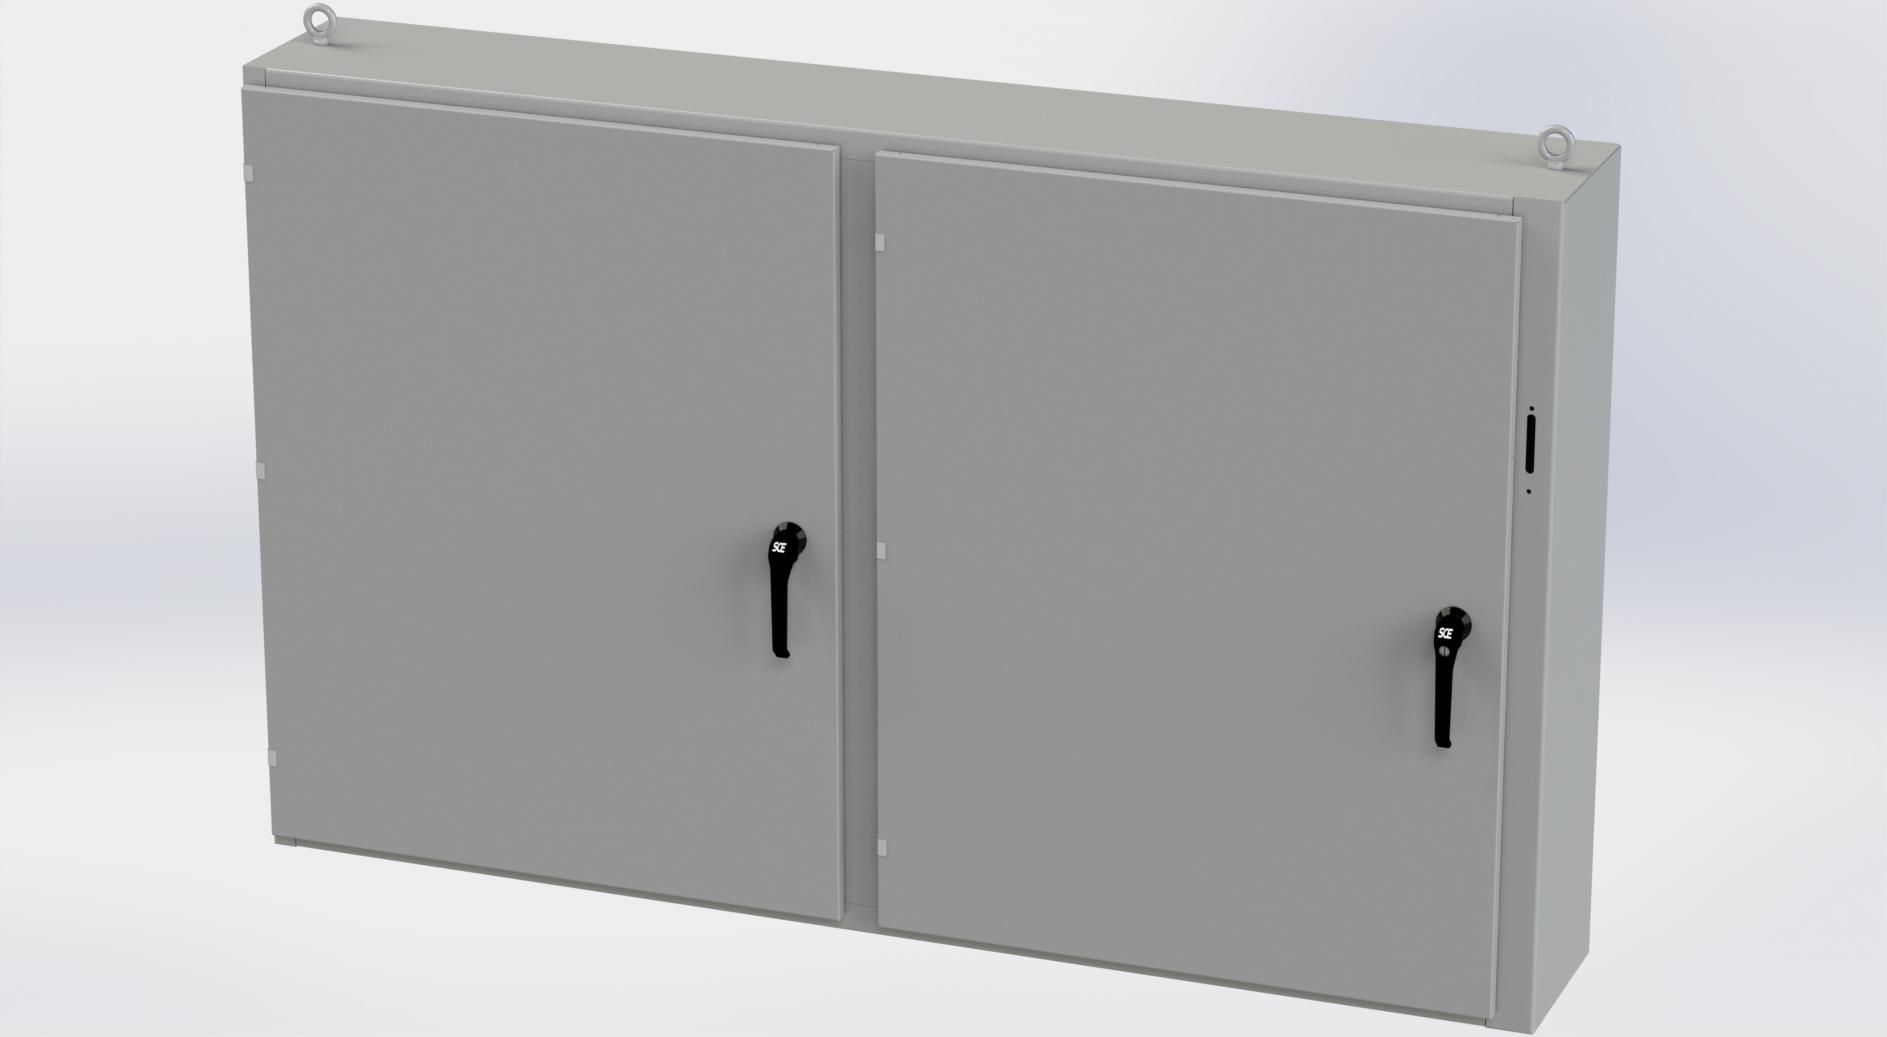 Saginaw Control SCE-48X2D7812 2DR Disc. Enclosure, Height:48.00", Width:77.75", Depth:12.00", ANSI-61 gray powder coating inside and out. Optional sub-panels are powder coated white.